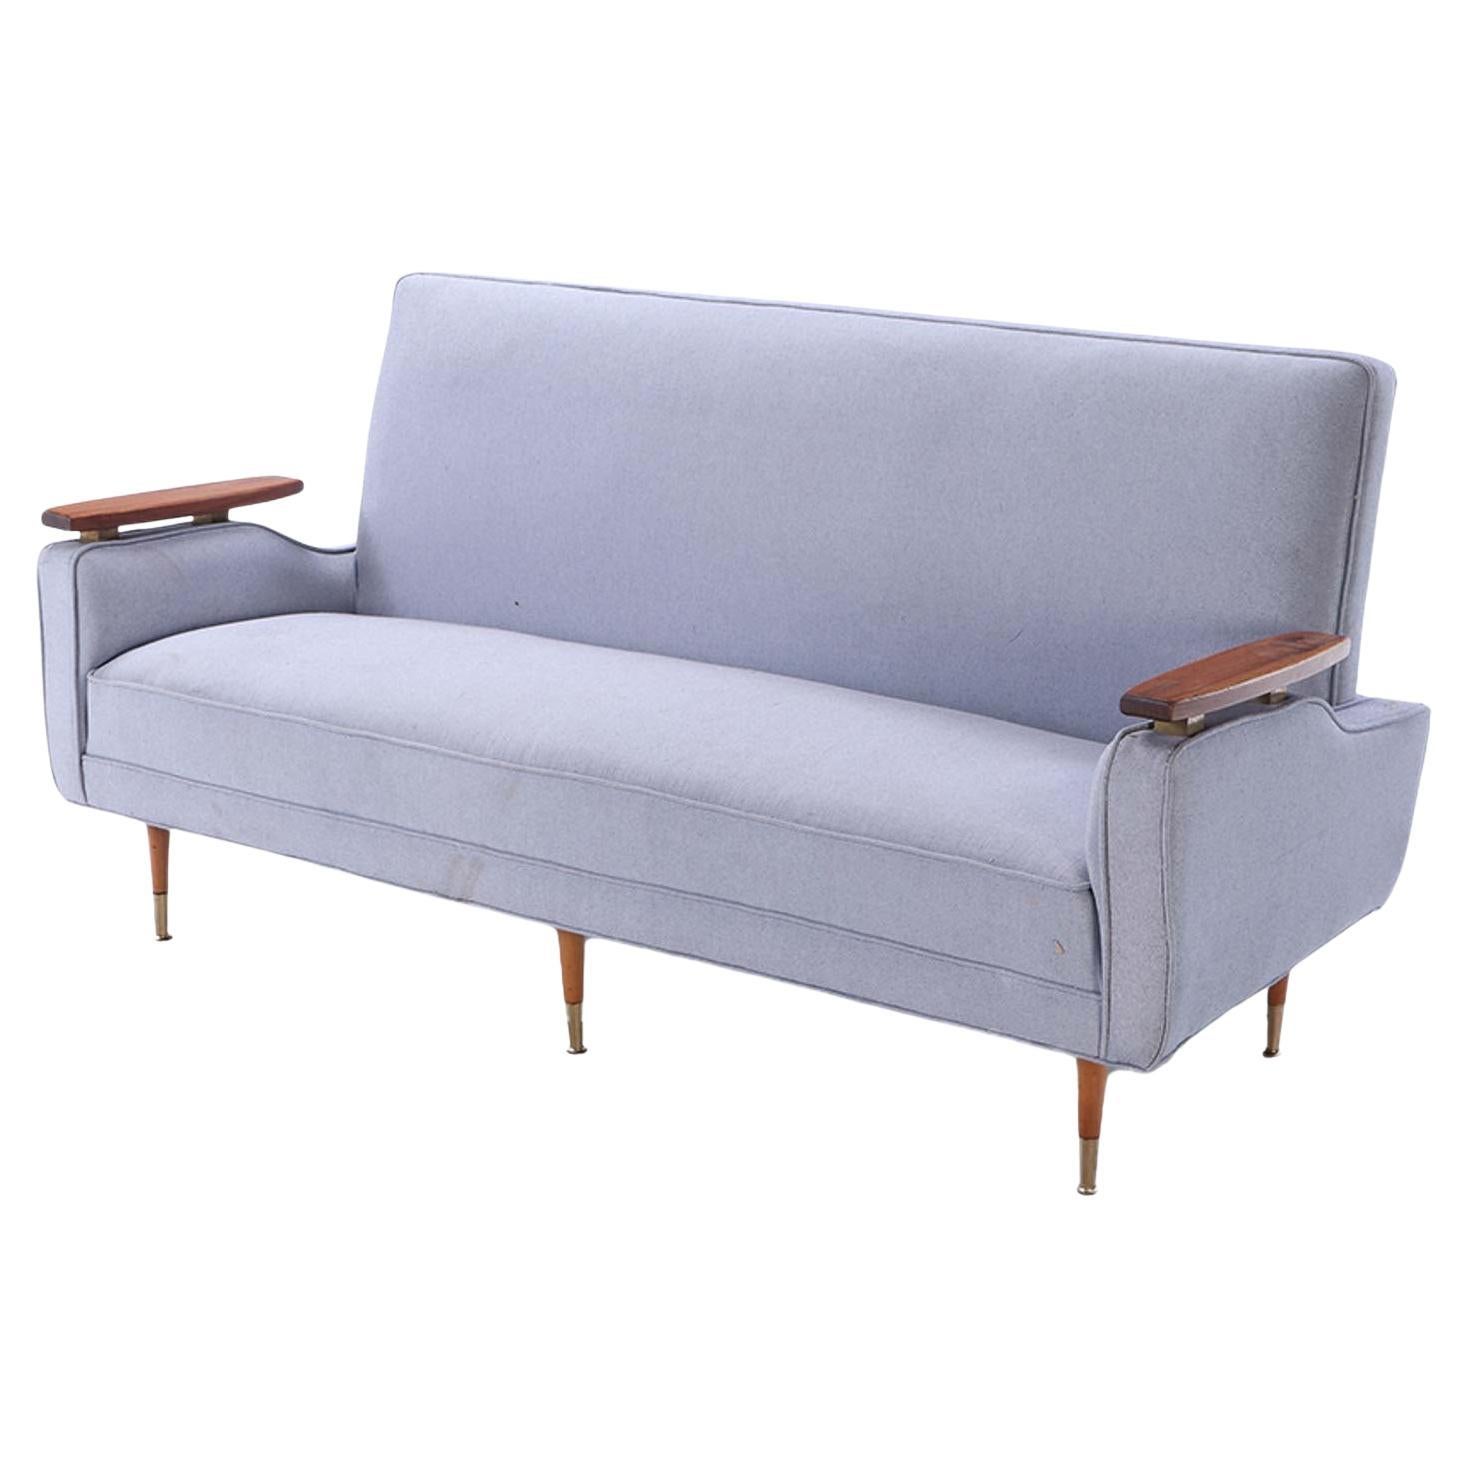 A restored sofa with floating wood arms and metal mounts circa 1960.